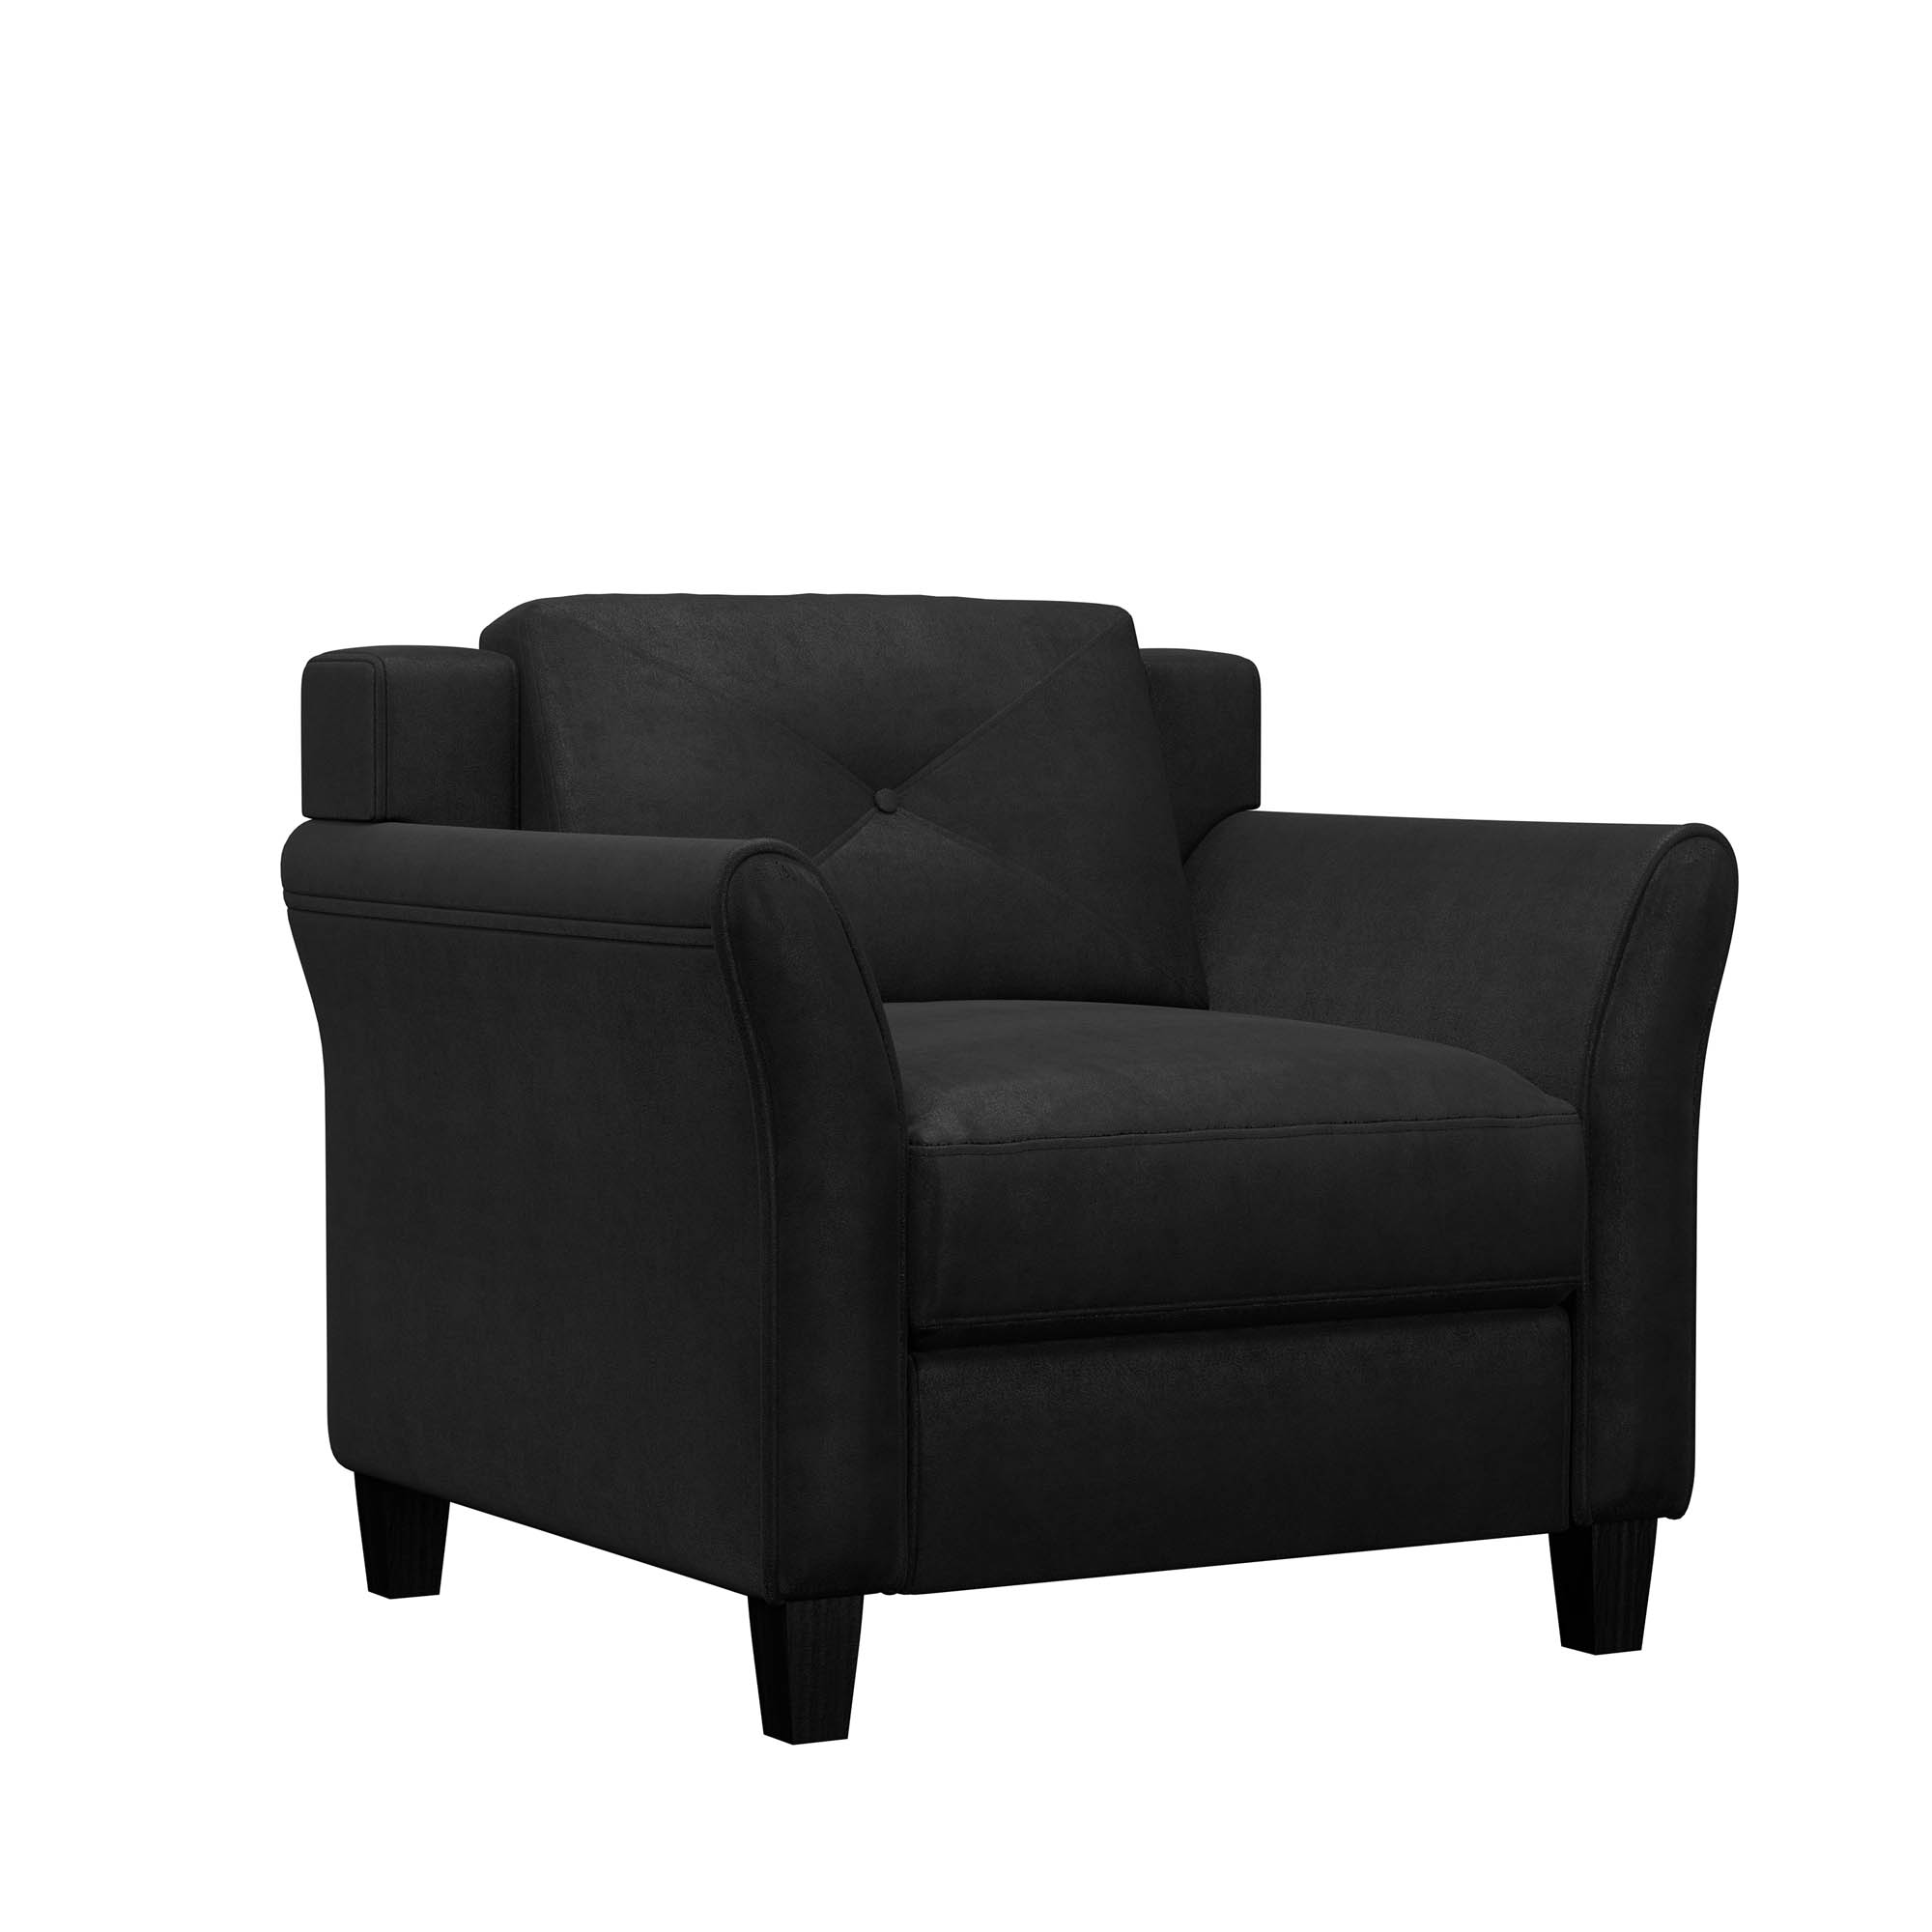 Lifestyle Solutions Taryn Club Chair, Black Fabric - image 3 of 17